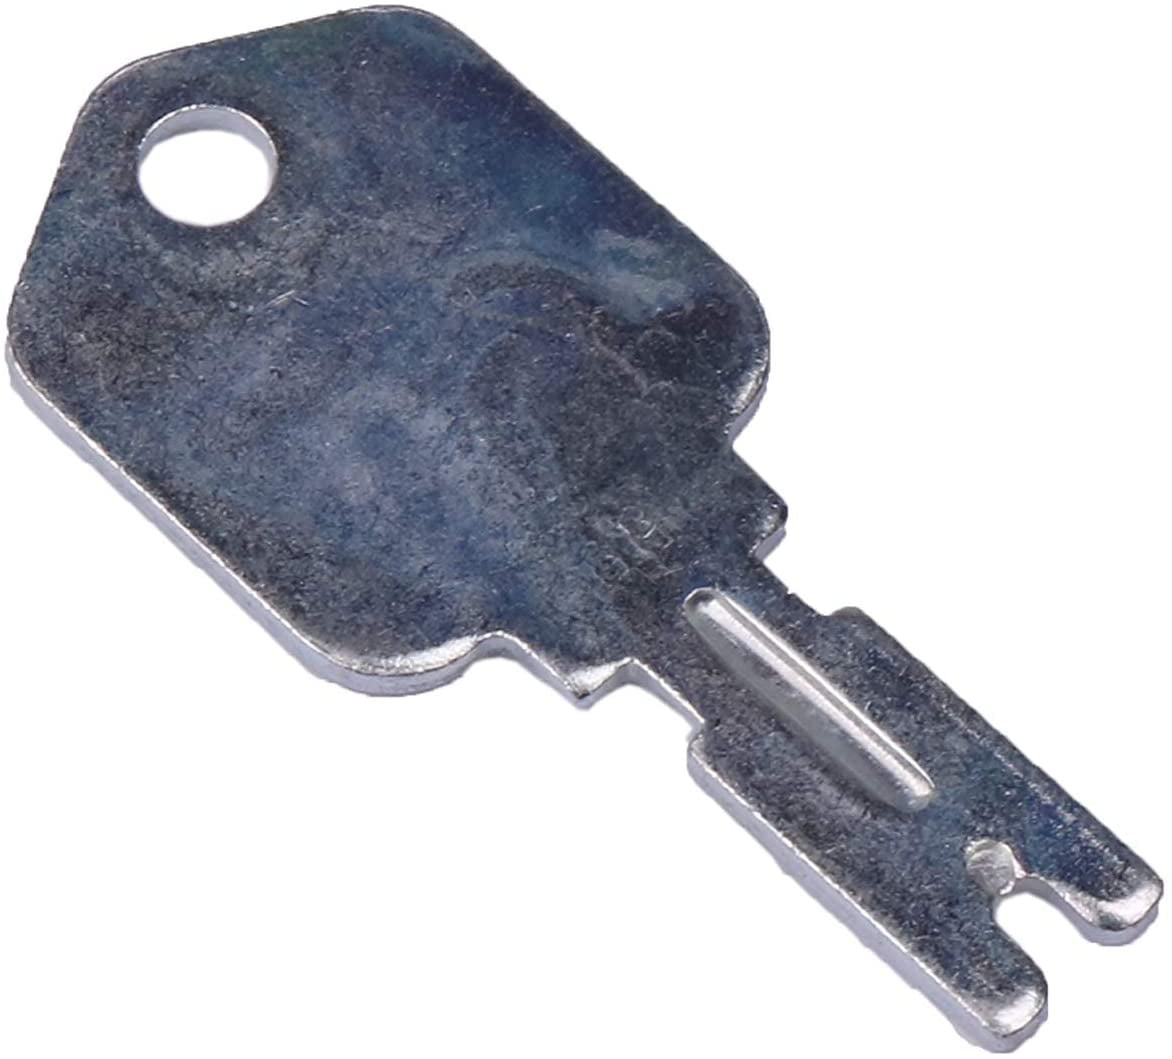 Forklift Ignition Key 166 Compatible with Generic Clark Yale Hyster for Komatsu Gradall Gehl Crown Cat Daewoo 186304 6T-2663 KM31166P 1430 Hyster Forklift Keys 4 